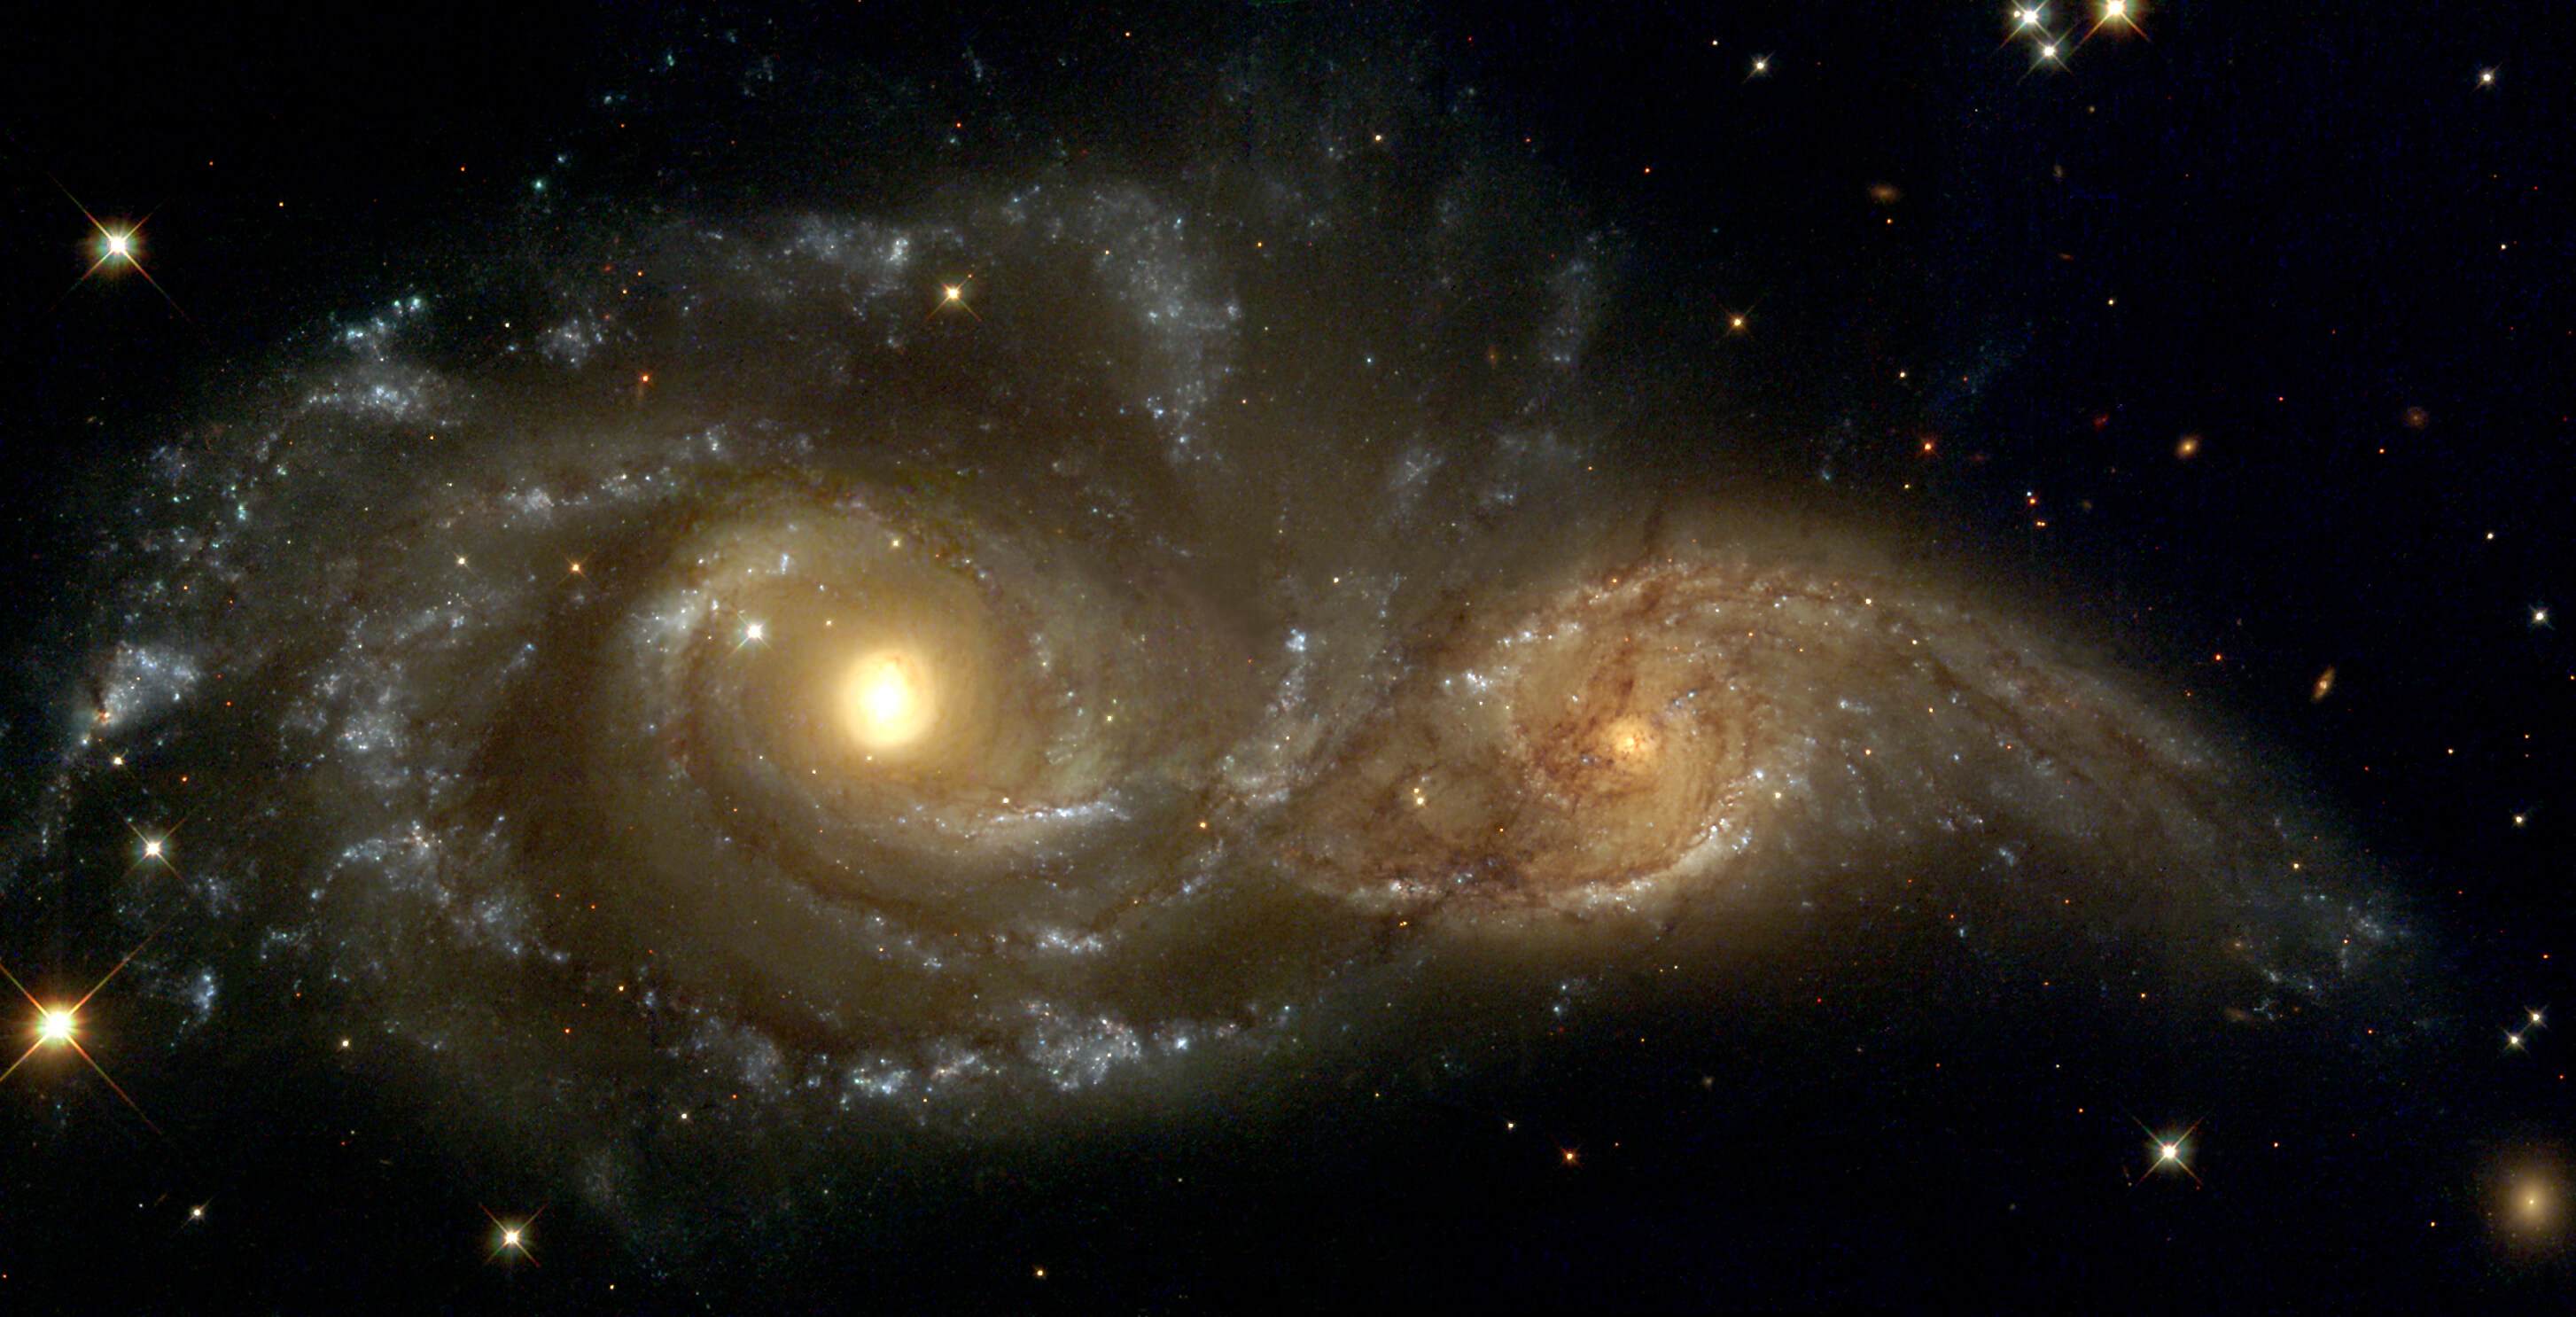 When galaxies collide or venture close to one another, gas and momentum is transferred between the galaxies. Shown are spiral galaxies NGC 2207 and IC 2163. Image: NASA and The Hubble Heritage Team.